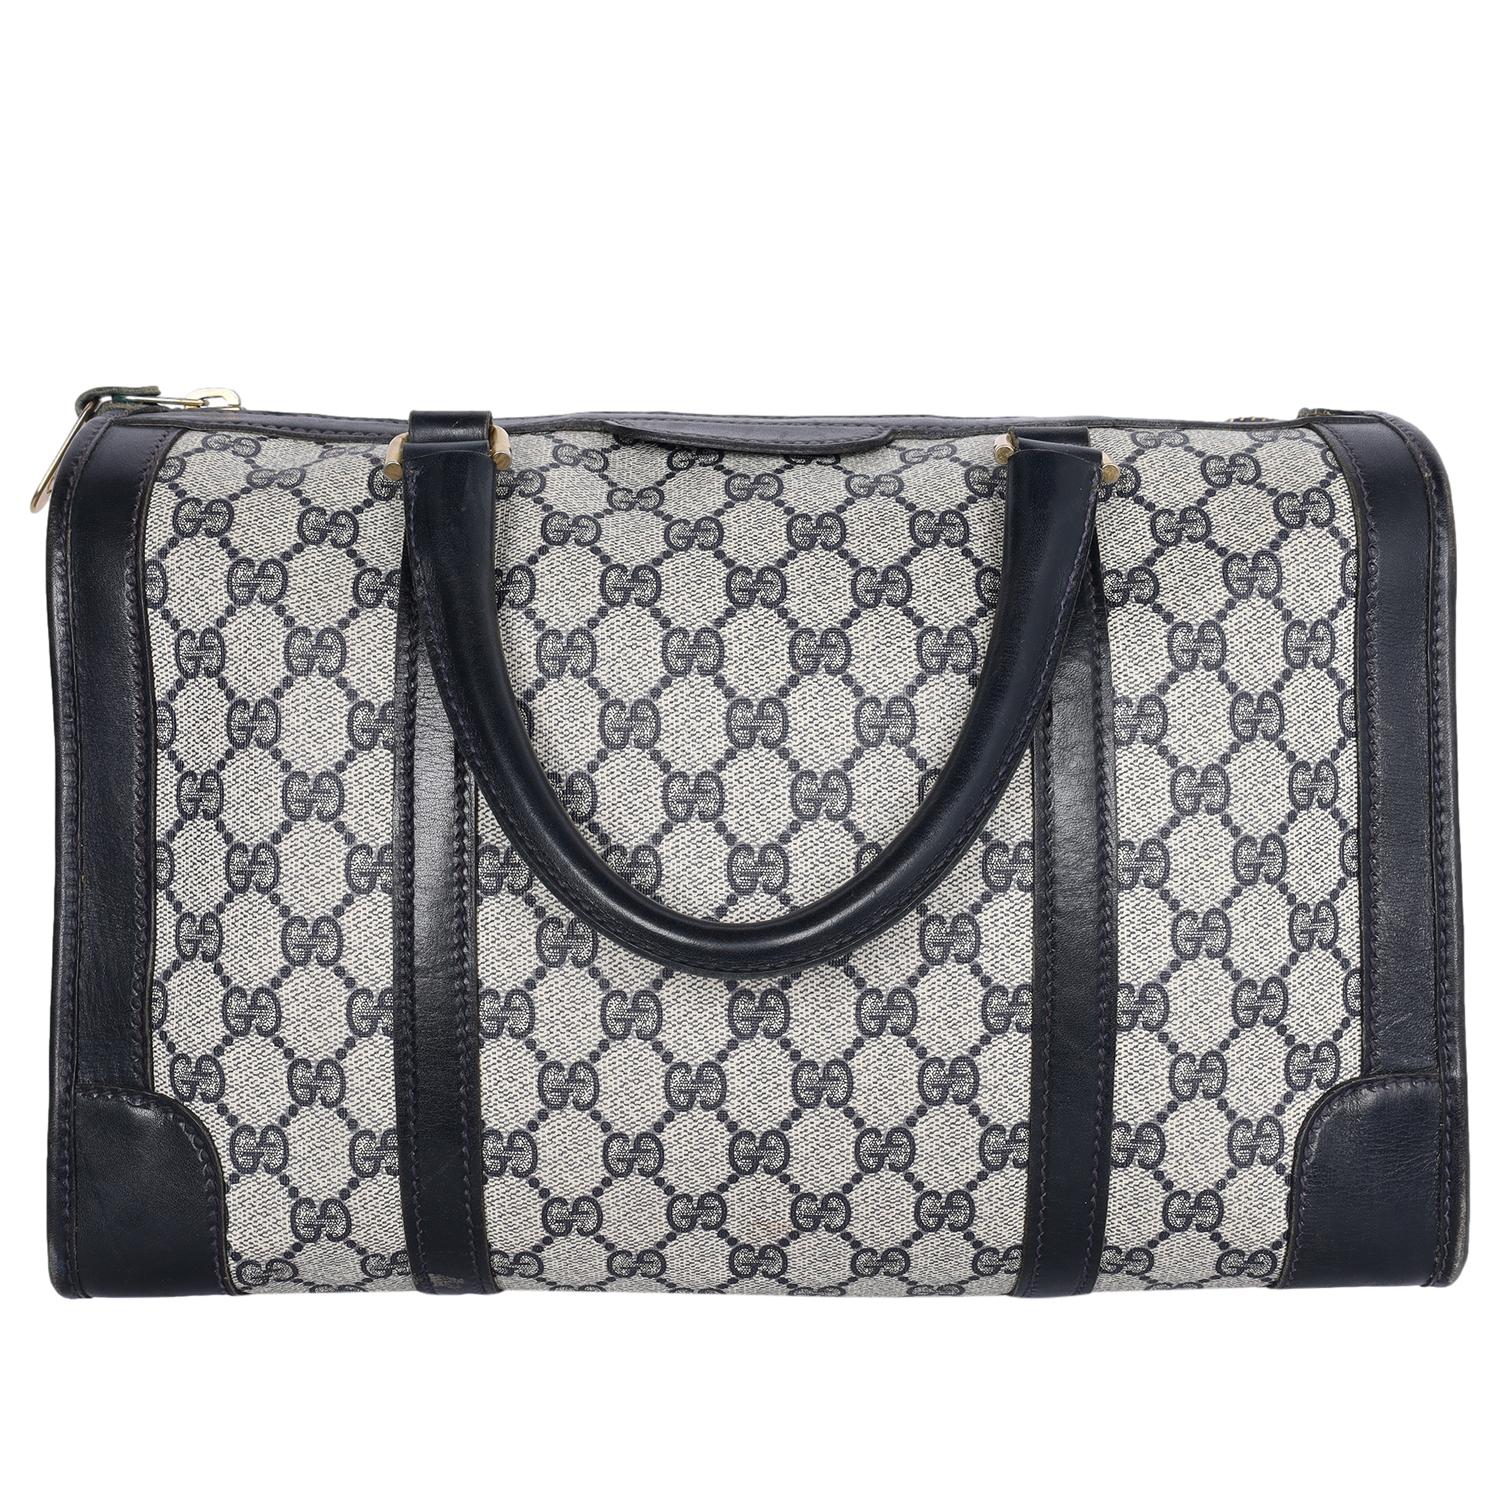 Authentic, pre-loved Gucci GG monogram blue canvas luggage top handle travel bag. Features navy blue GG monogram canvas, zipper top closure, top handles, gold hardware, large interior with zipper pocket. 

FAA approved for carrying on for all